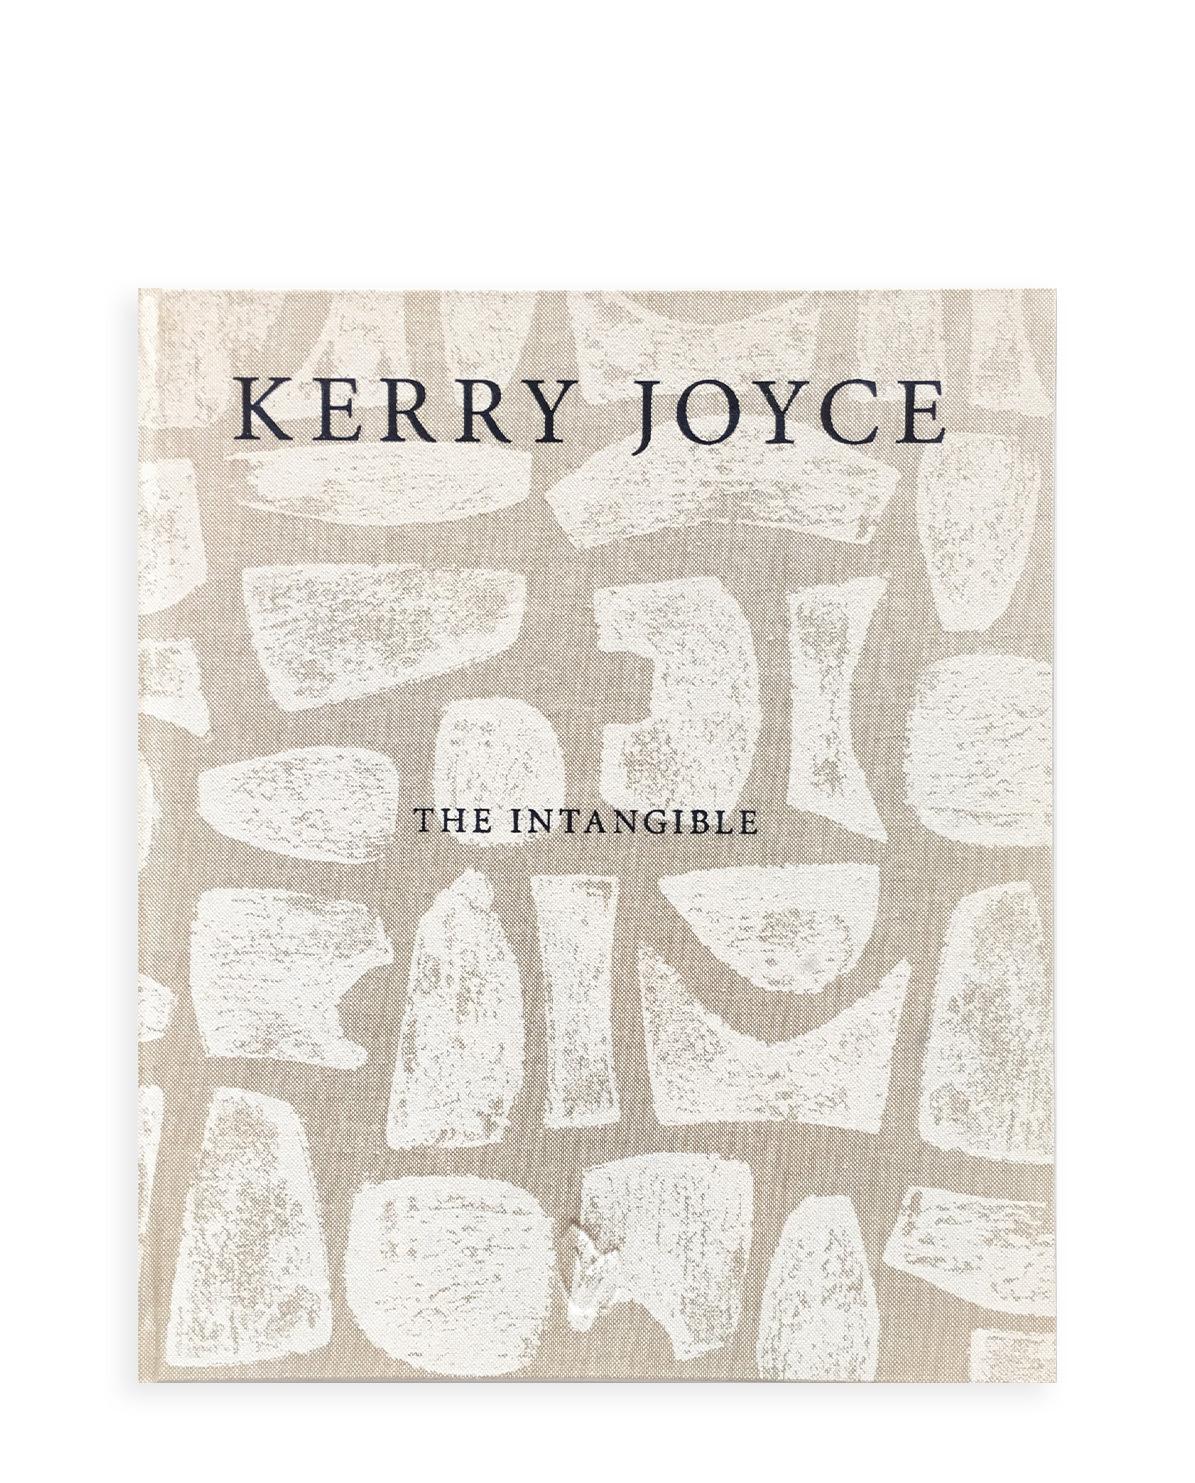 Buch Kerry Joyce: The Intangible One Size